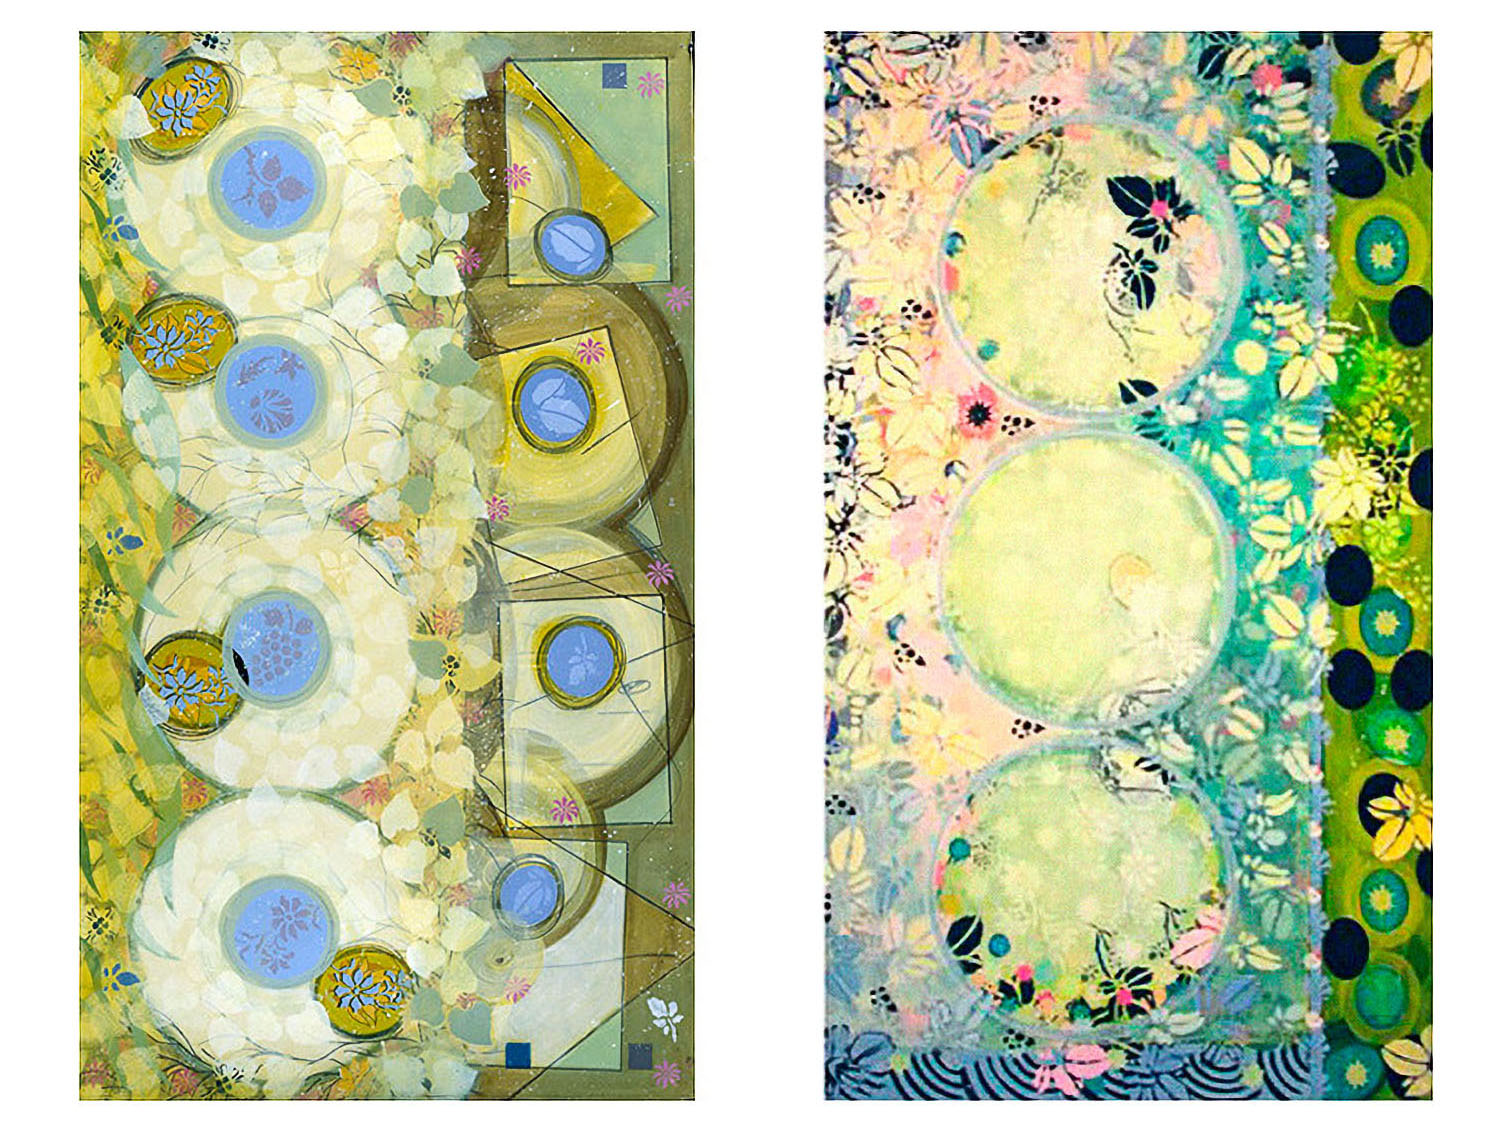 FOUR AND FOUR, acrylic on 300 lb. Lanaquarelle, 57”x36”, 2011 / SEASON, SURVEY, acrylic on 300 lb. Lanaquarelle, 58”x36”, 2011